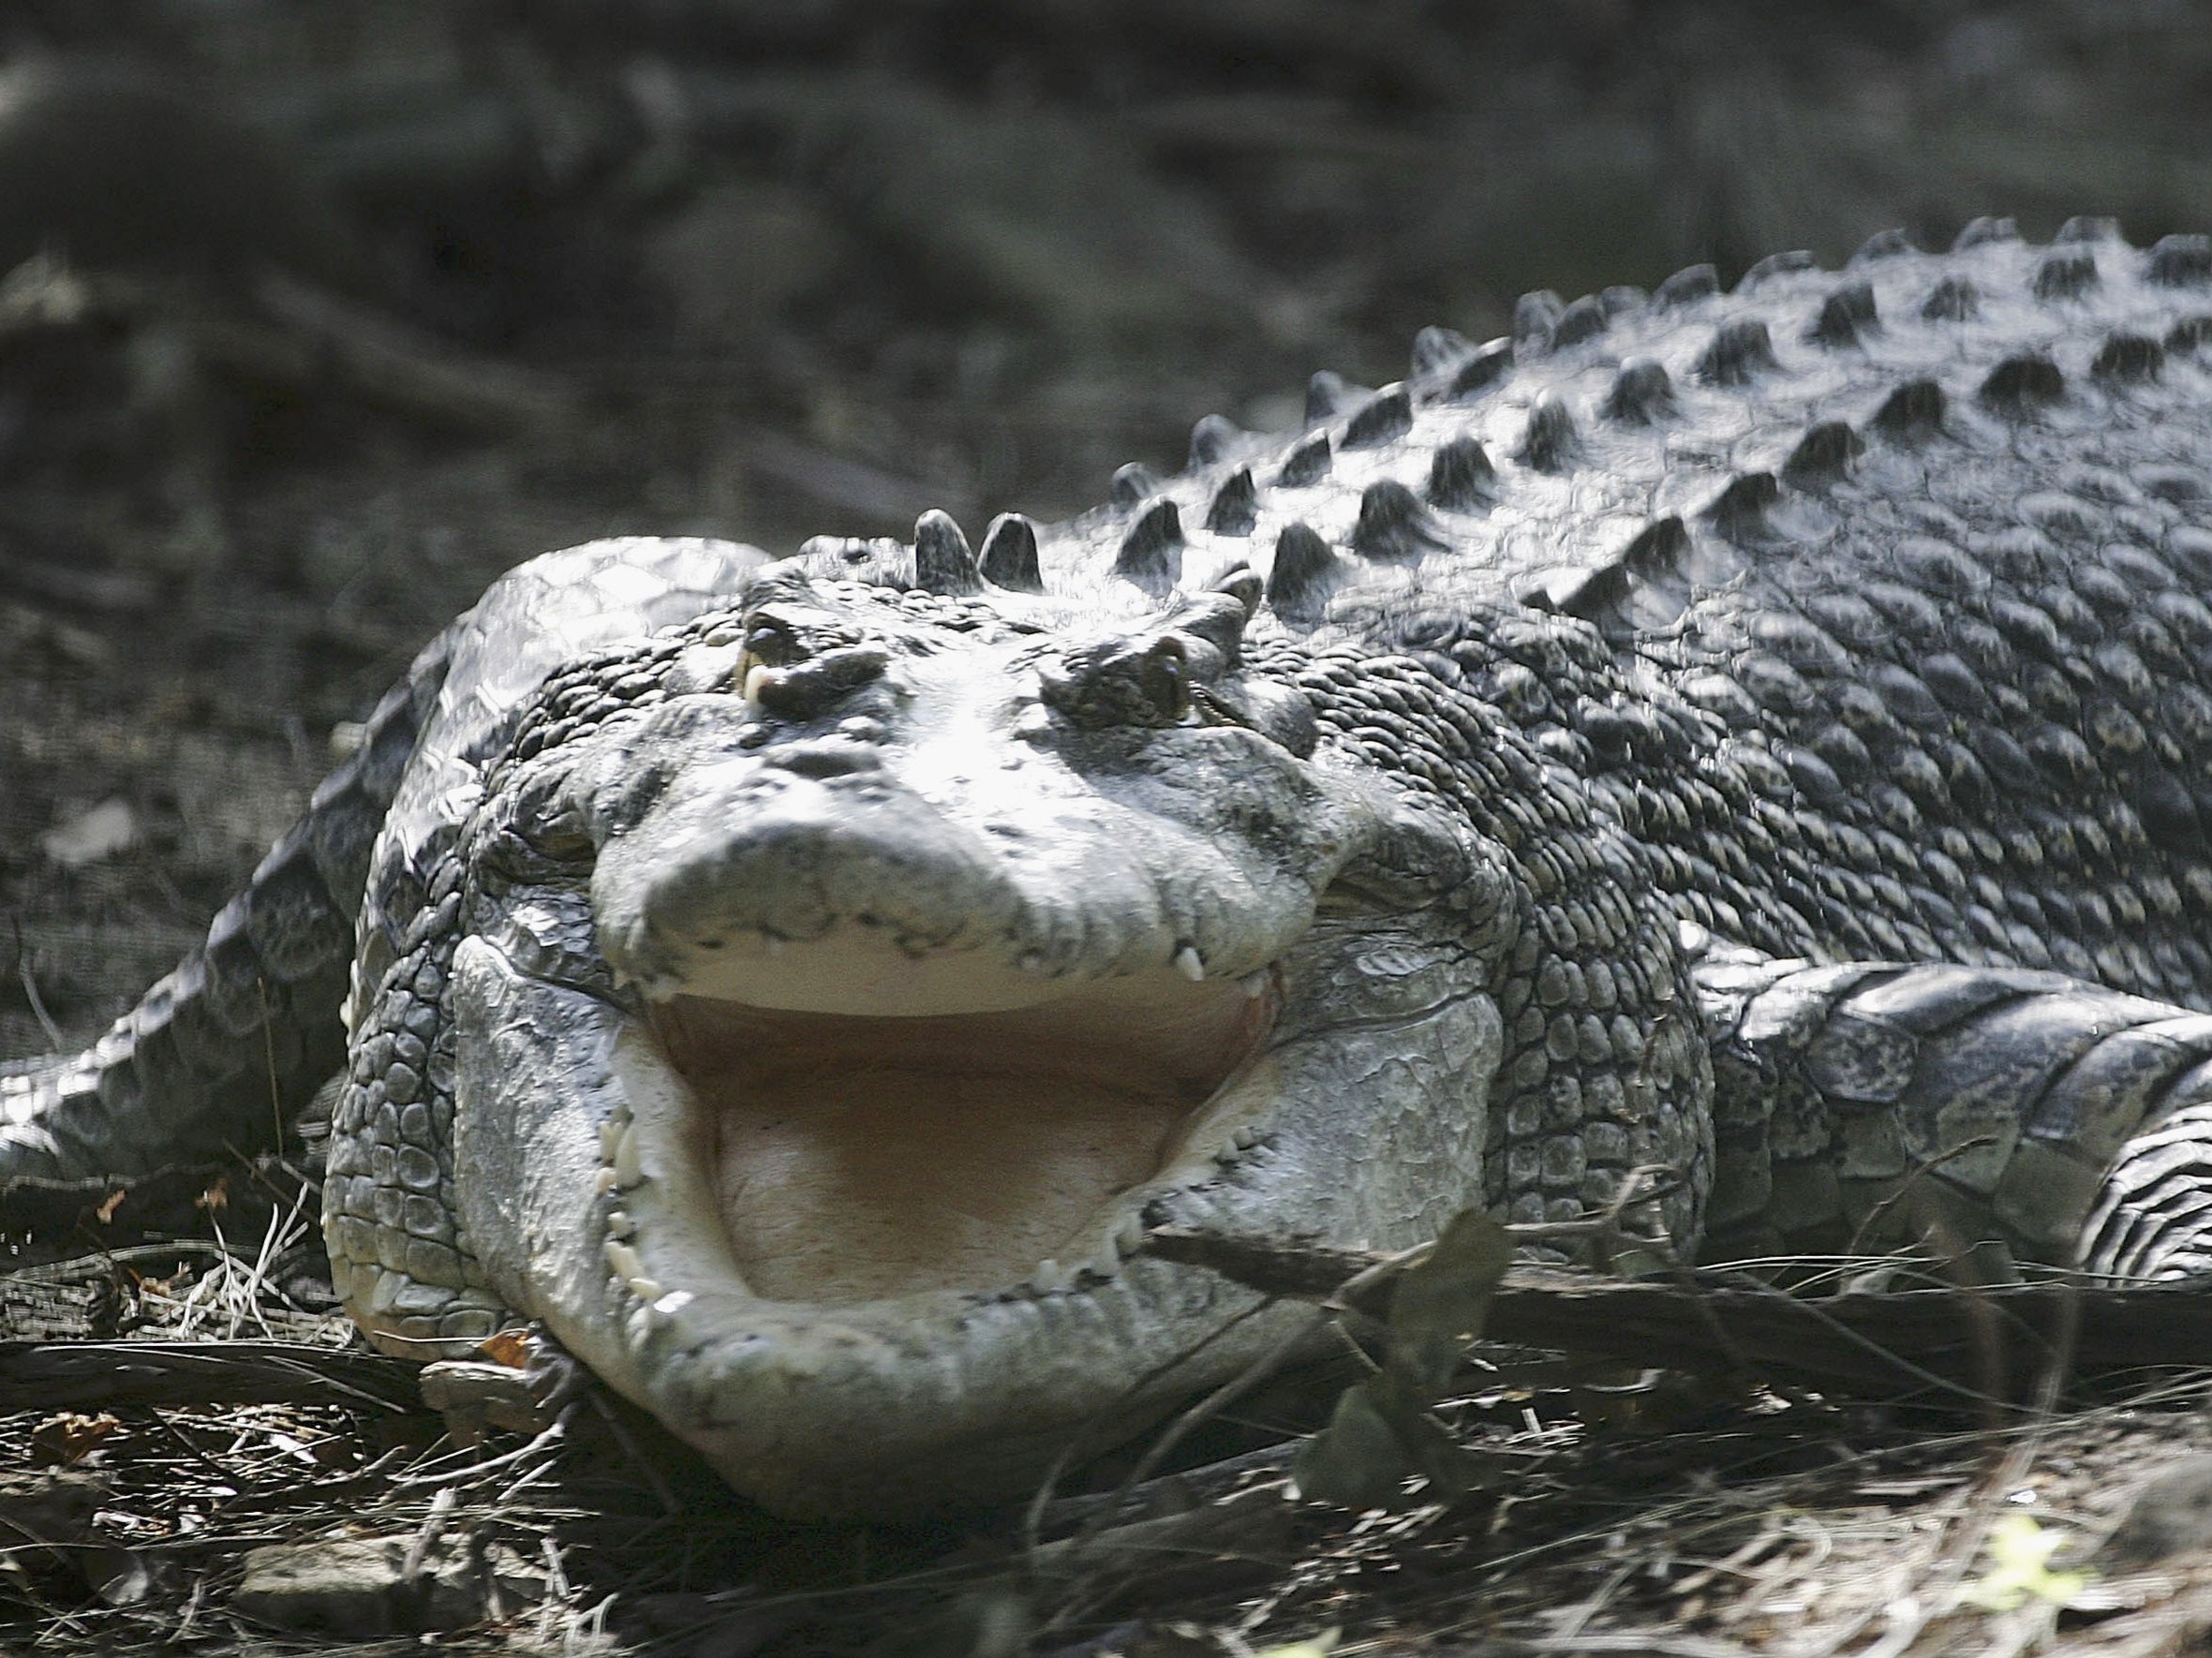 Two American tourists injured in crocodile attack at Mexico resort | The  Independent